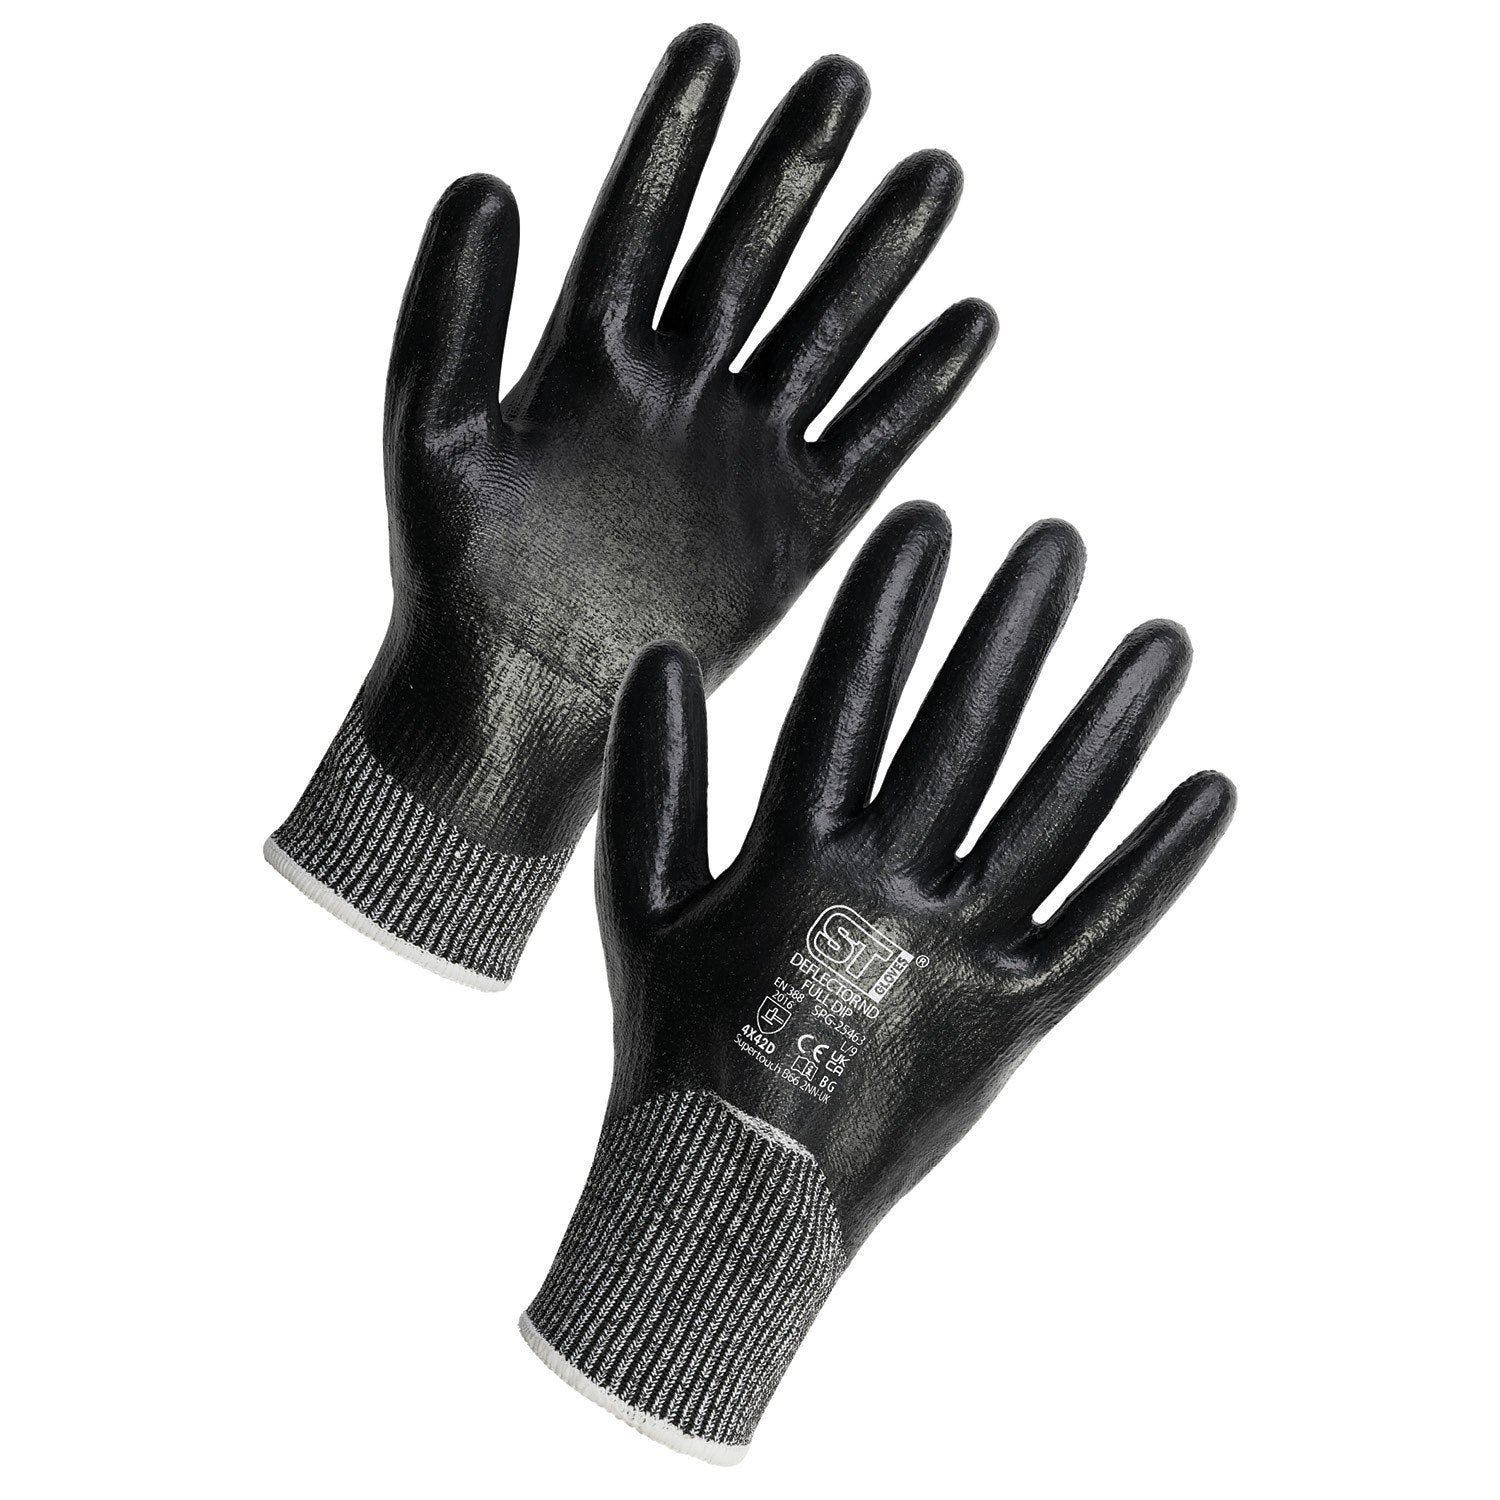 Supertouch Supertouch Deflector ND Full Dip Cut Resistant Gloves - G113